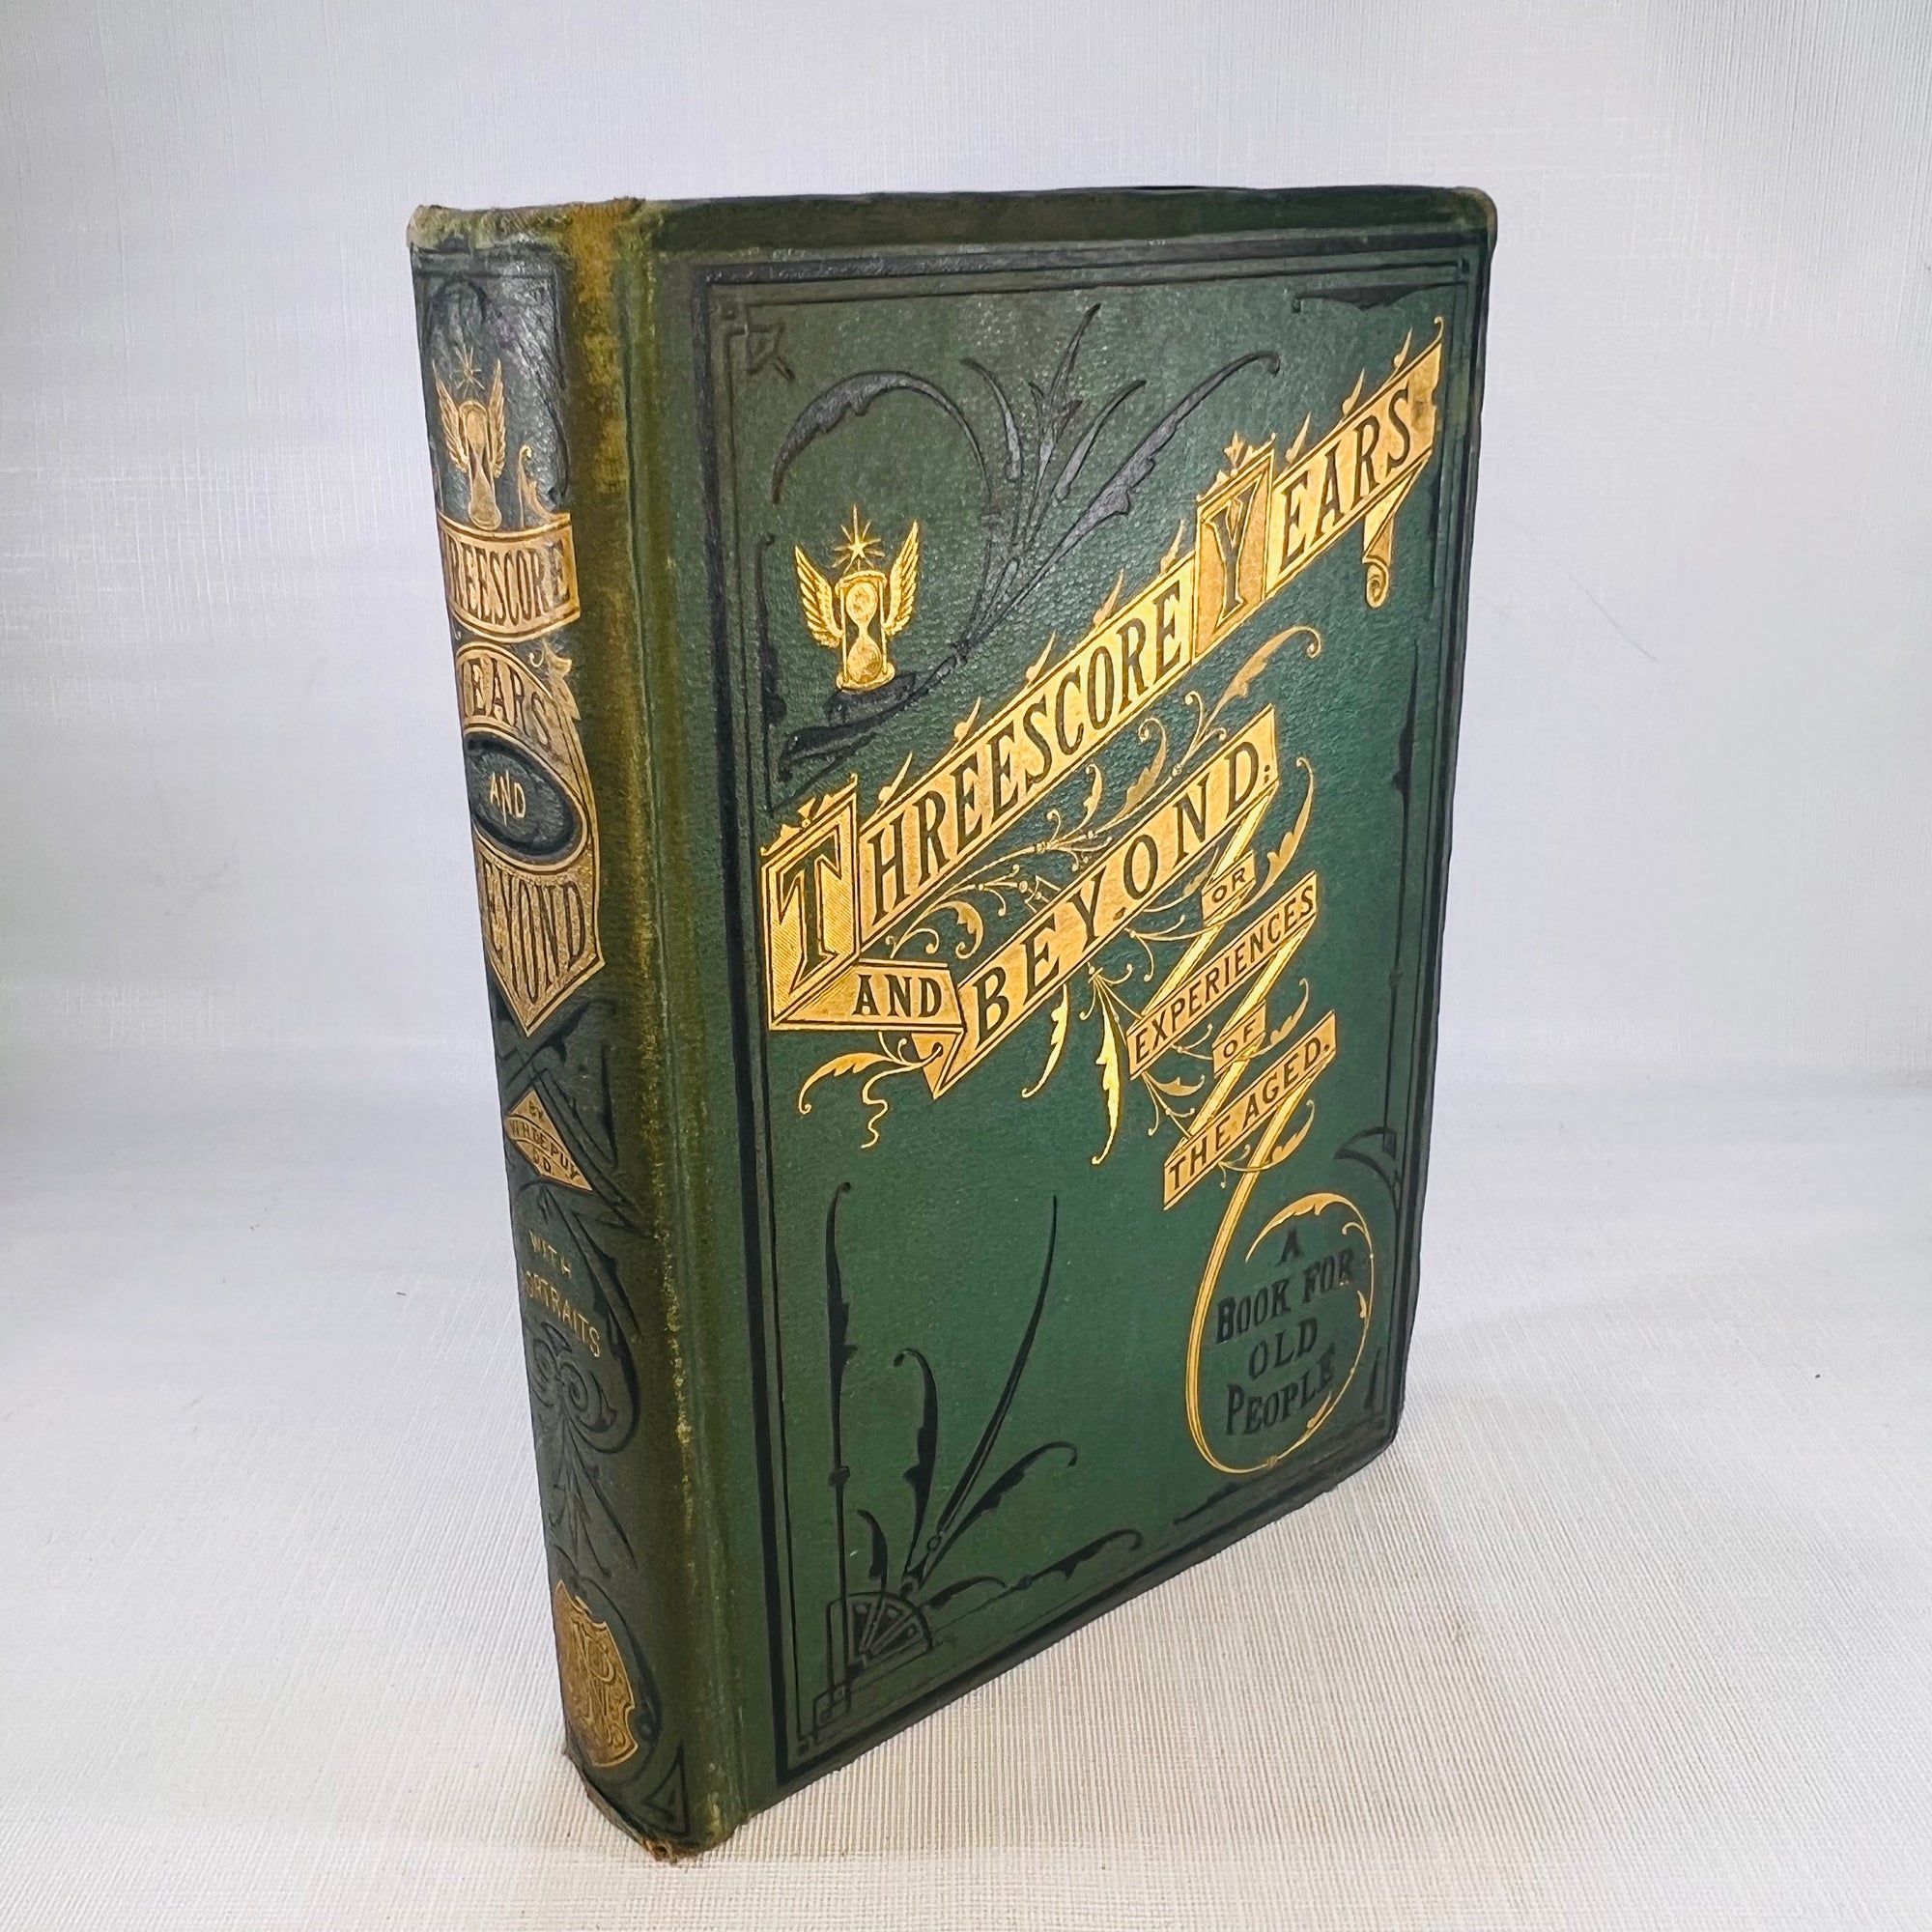 Threescore Years and Beyond or Experiences of the Aged illustrated edition by Rv. W.H.De Puy Nelson & Phillips 1876